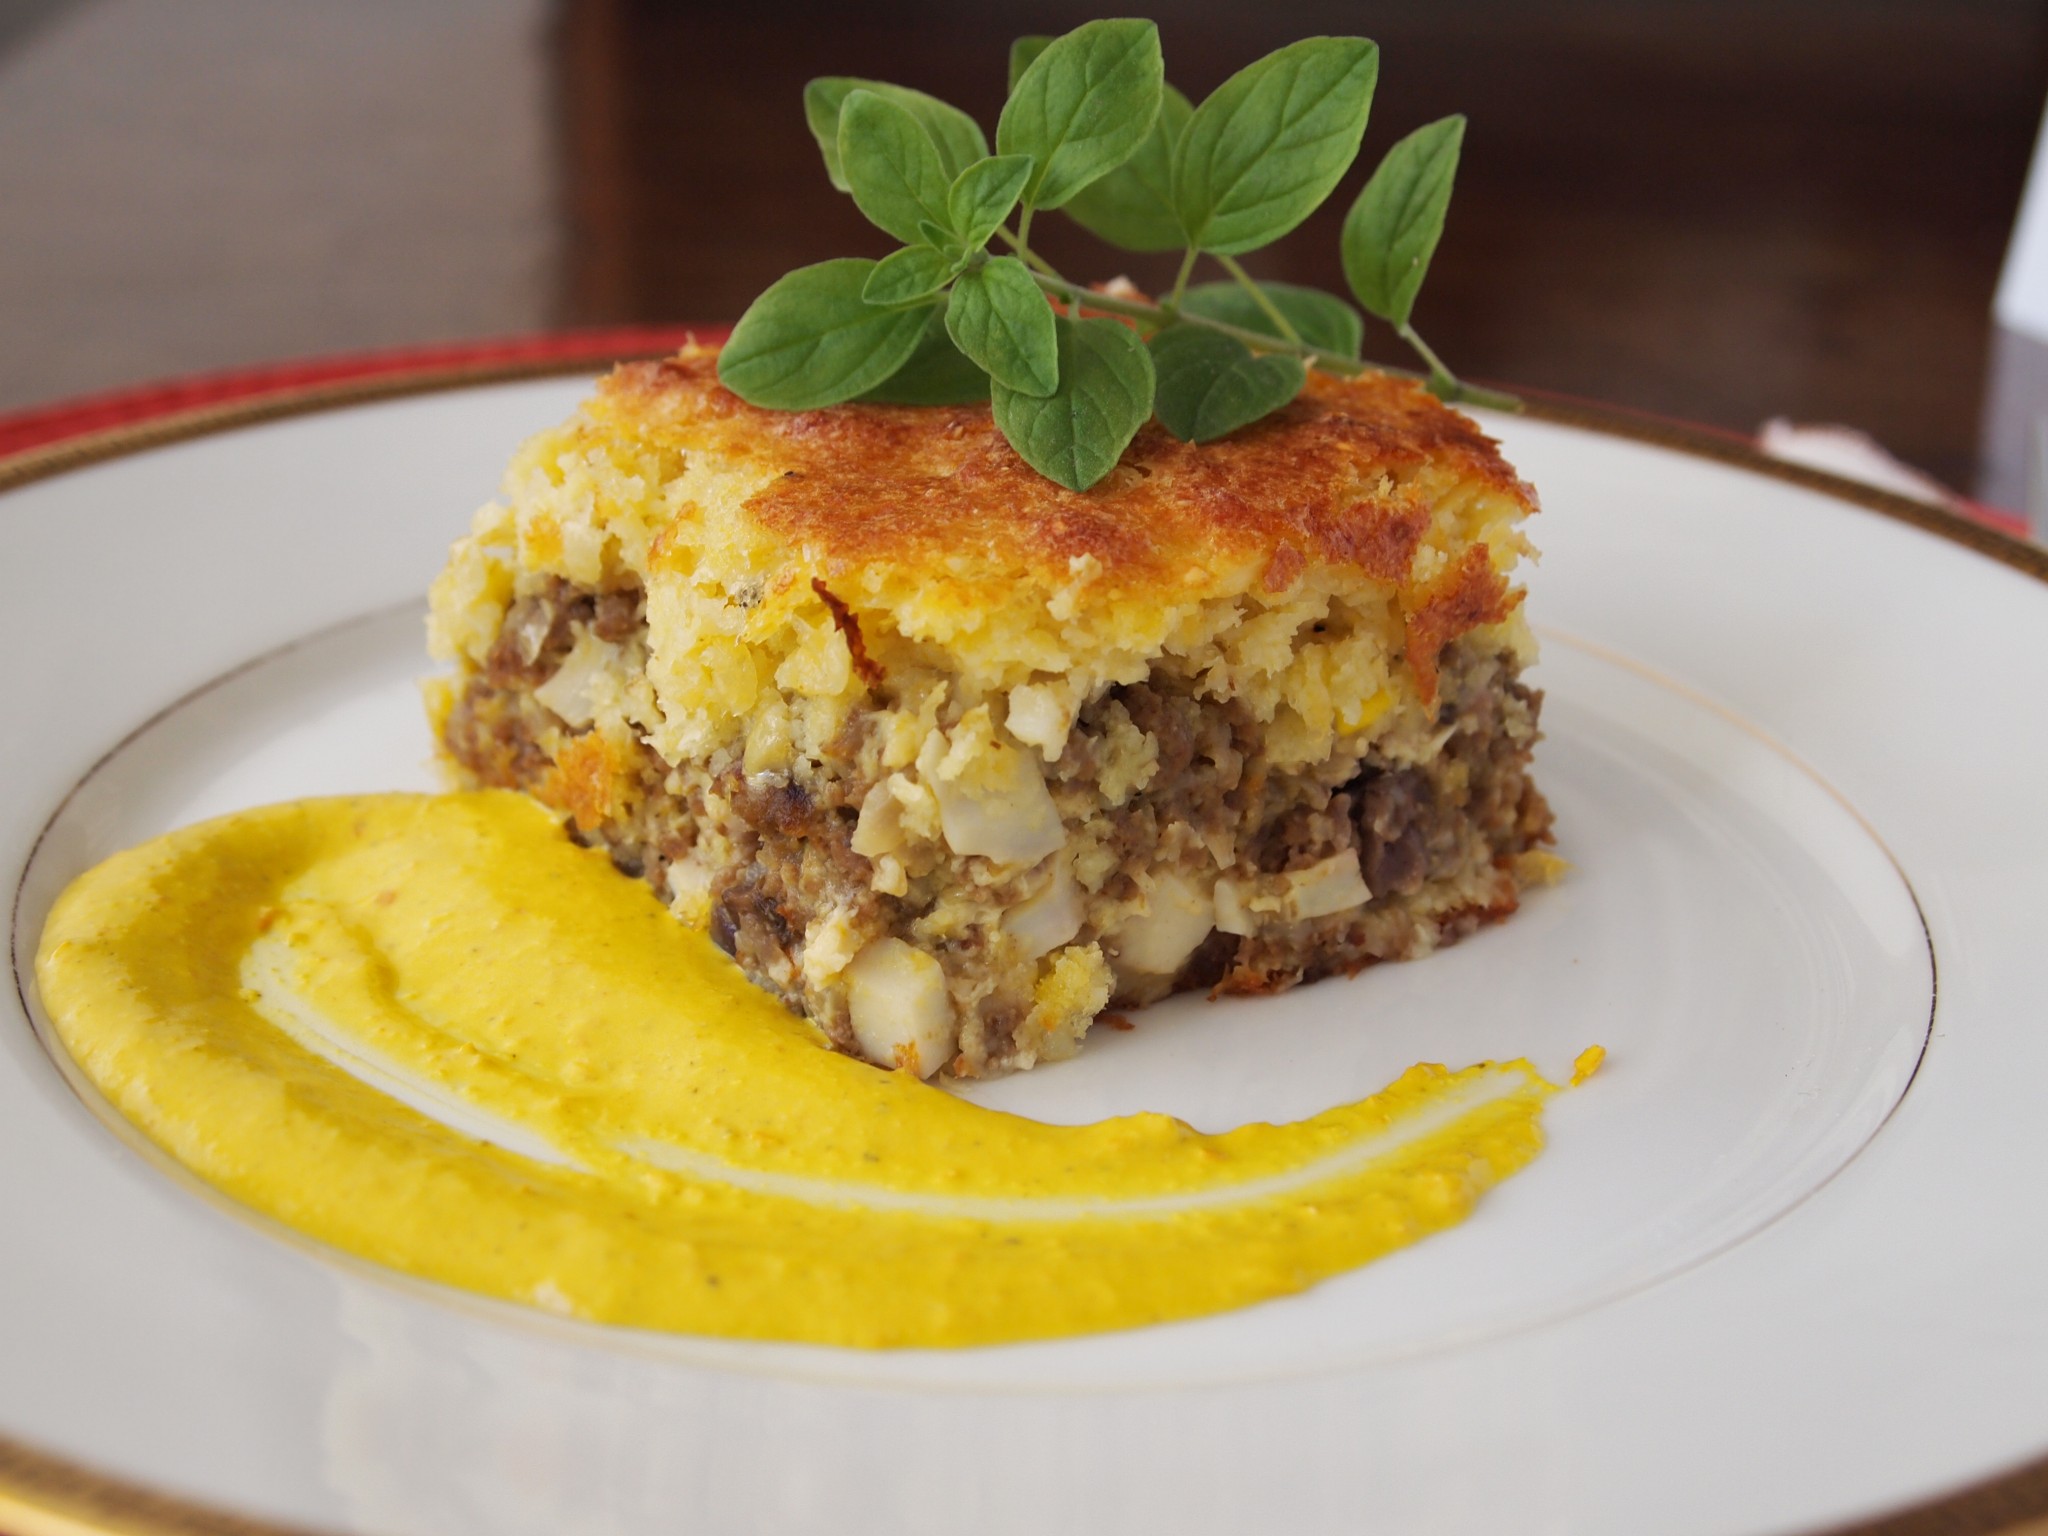 Corn pie, stuffed with beef, raisins, black olives and boiled eggs.